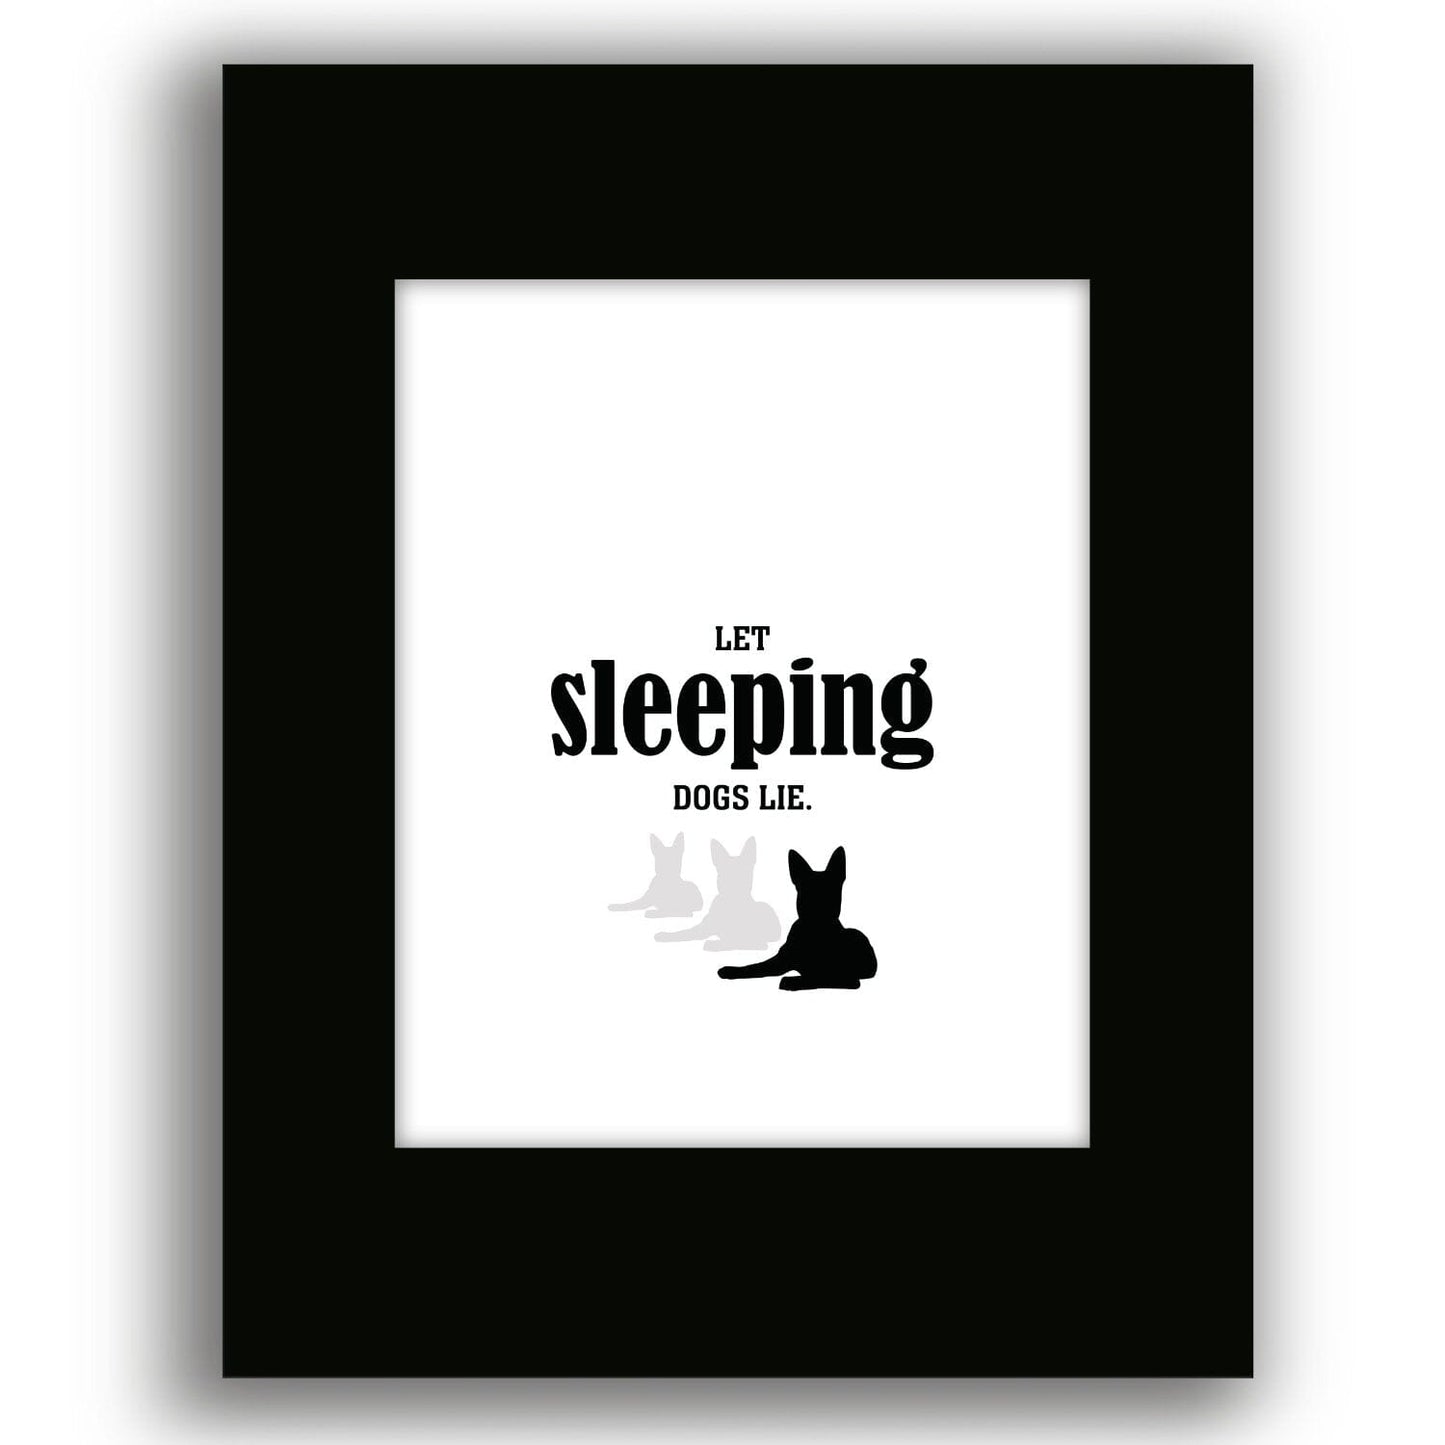 Let Sleeping Dogs Lie - Funny Wise and Witty Quote Wall Print Wise and Wiseass Quotes Song Lyrics Art 8x10 Black Matted Print 